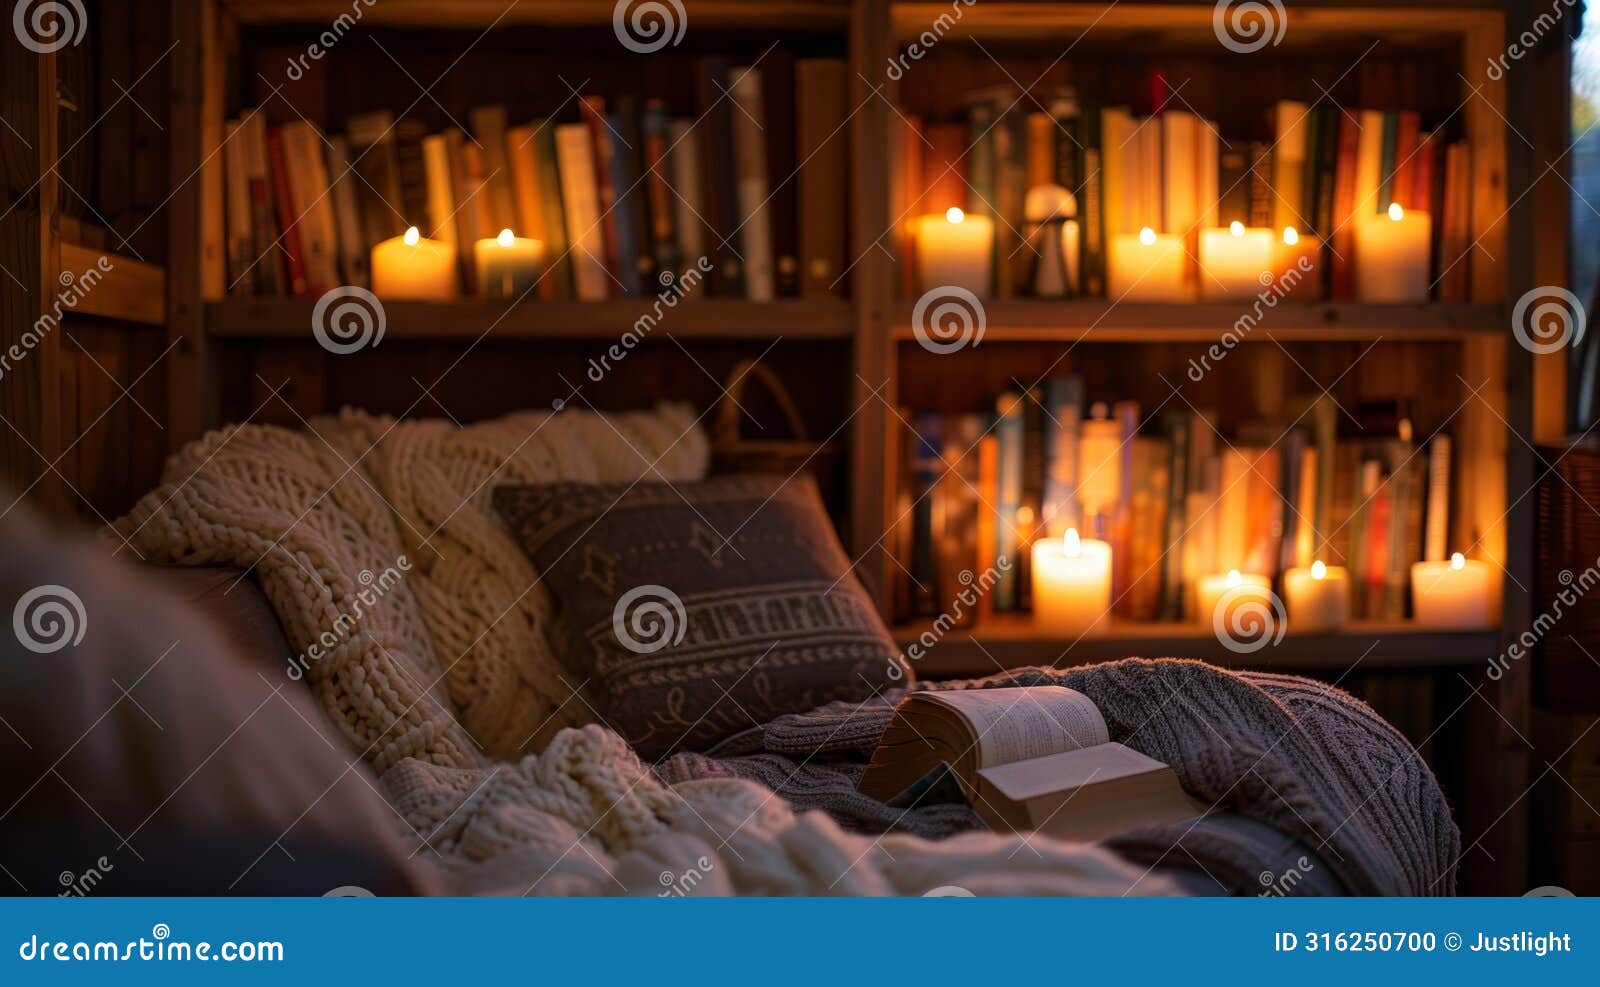 as night falls the reading nook becomes a peaceful retreat with the soft glimmer of candles providing a sense of comfort